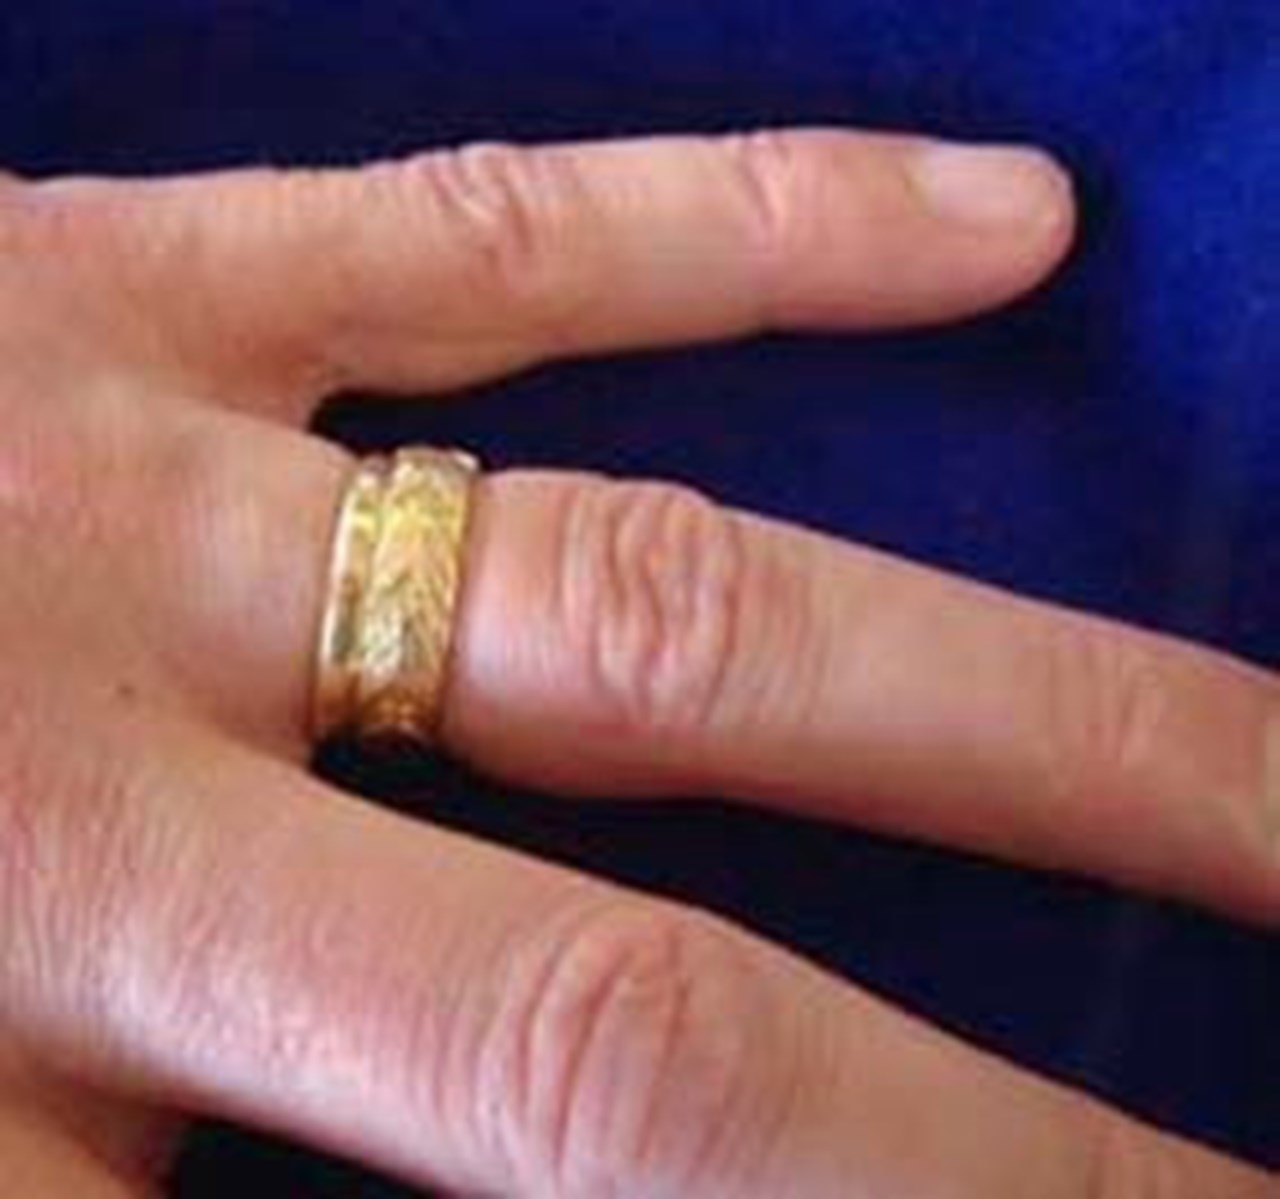 Photo of a wedding ring inside a doctoral ring.